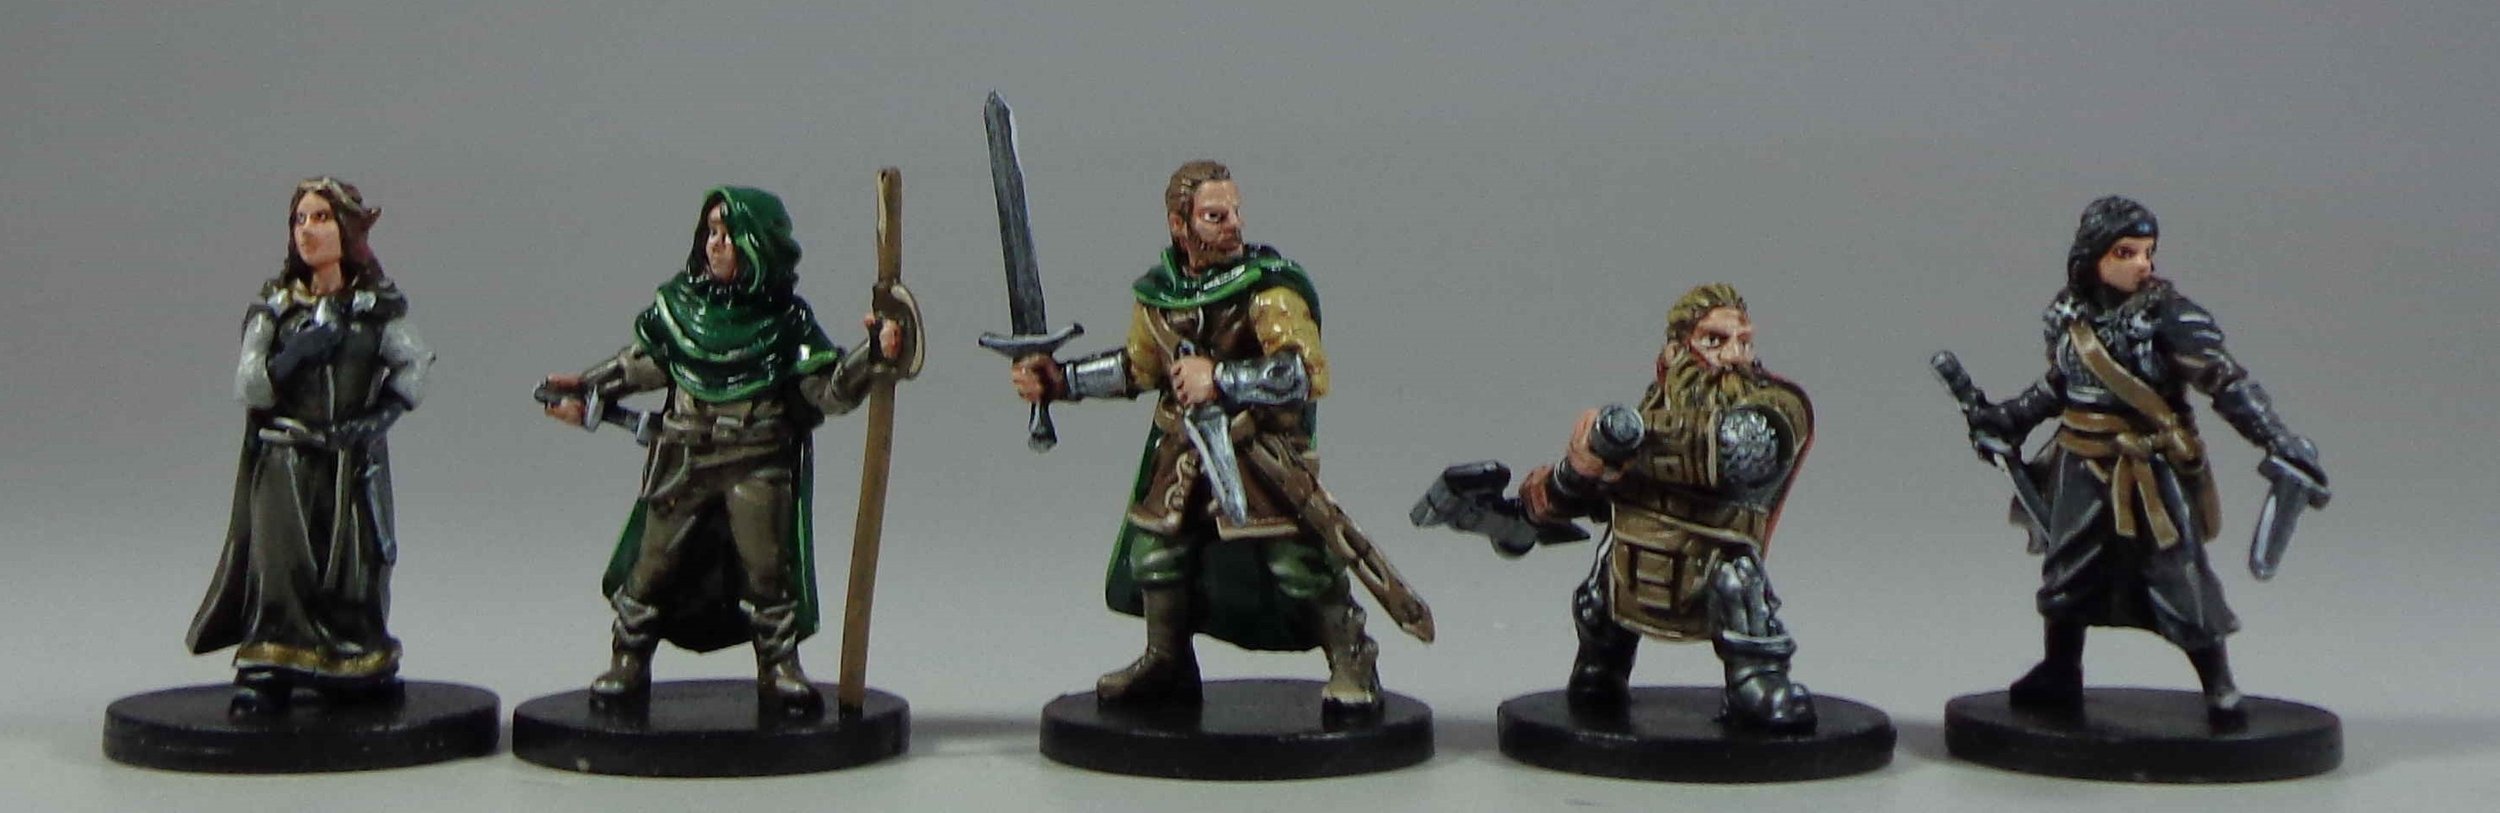 Journeys in Middle Earth Miniature Painting Service (10).jpg